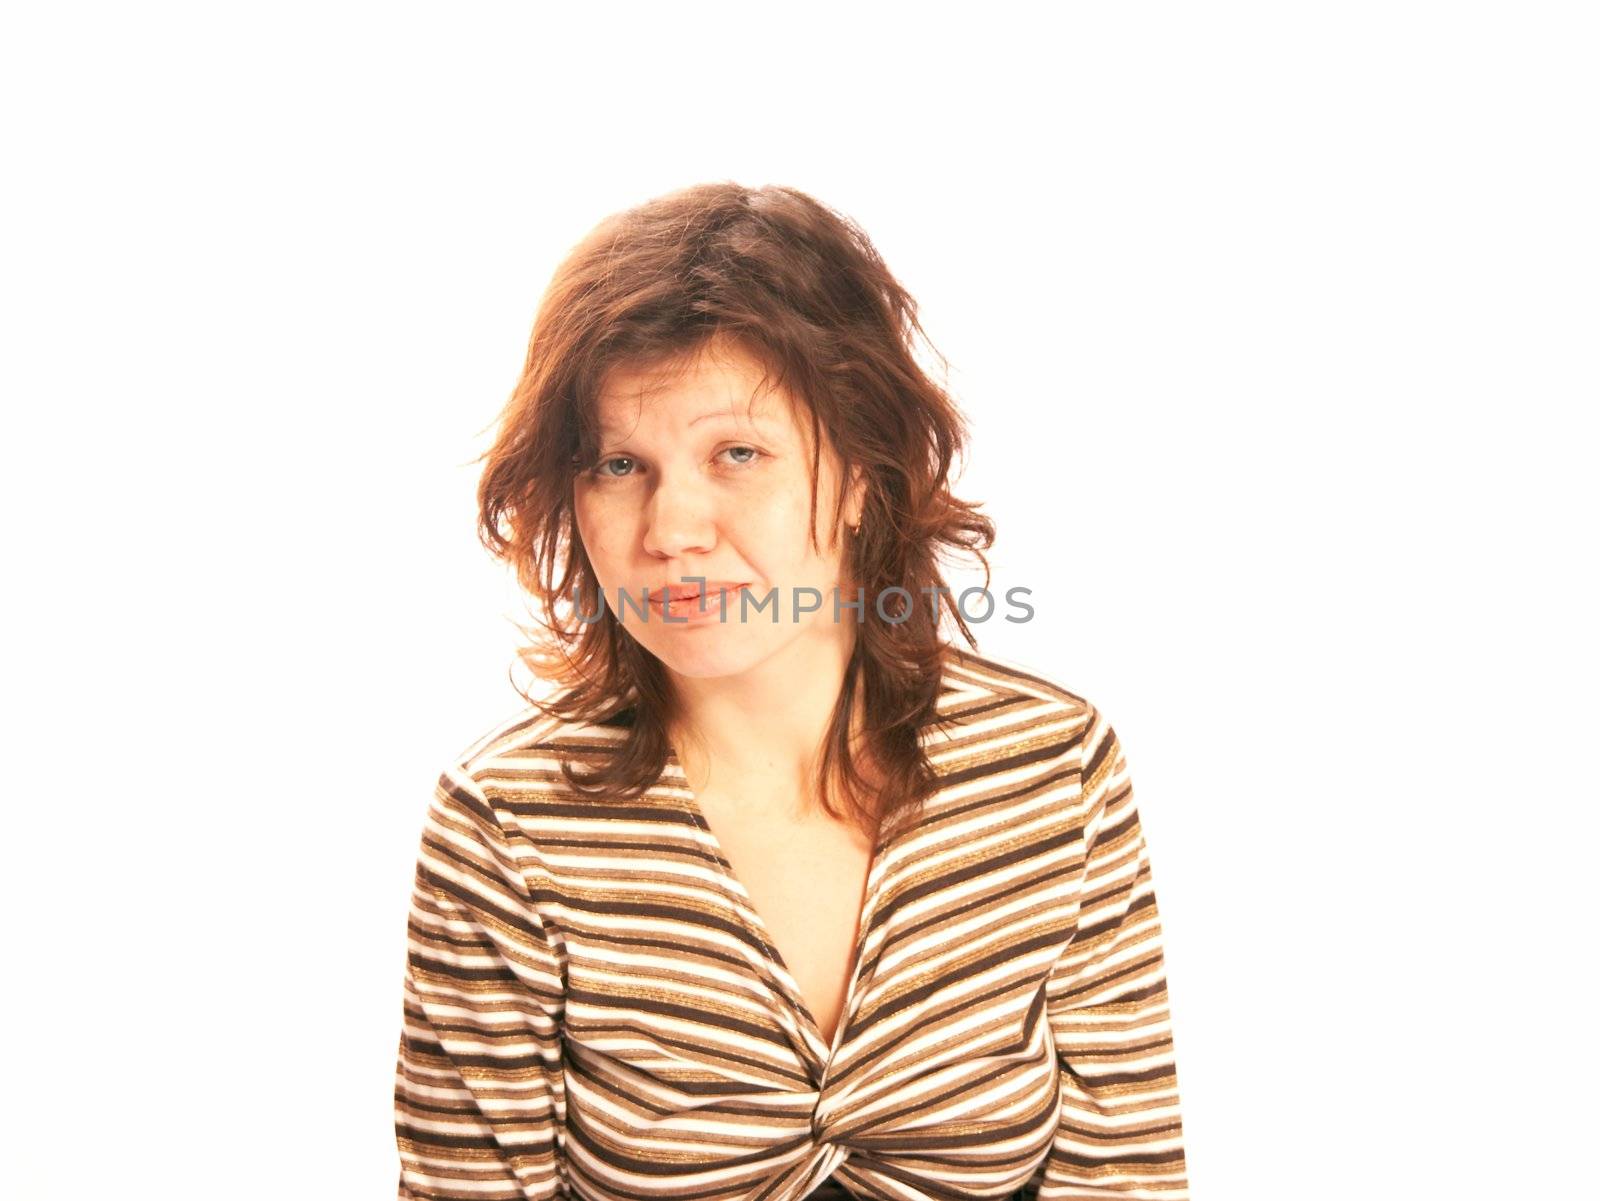 The girl in a striped jacket on a white background